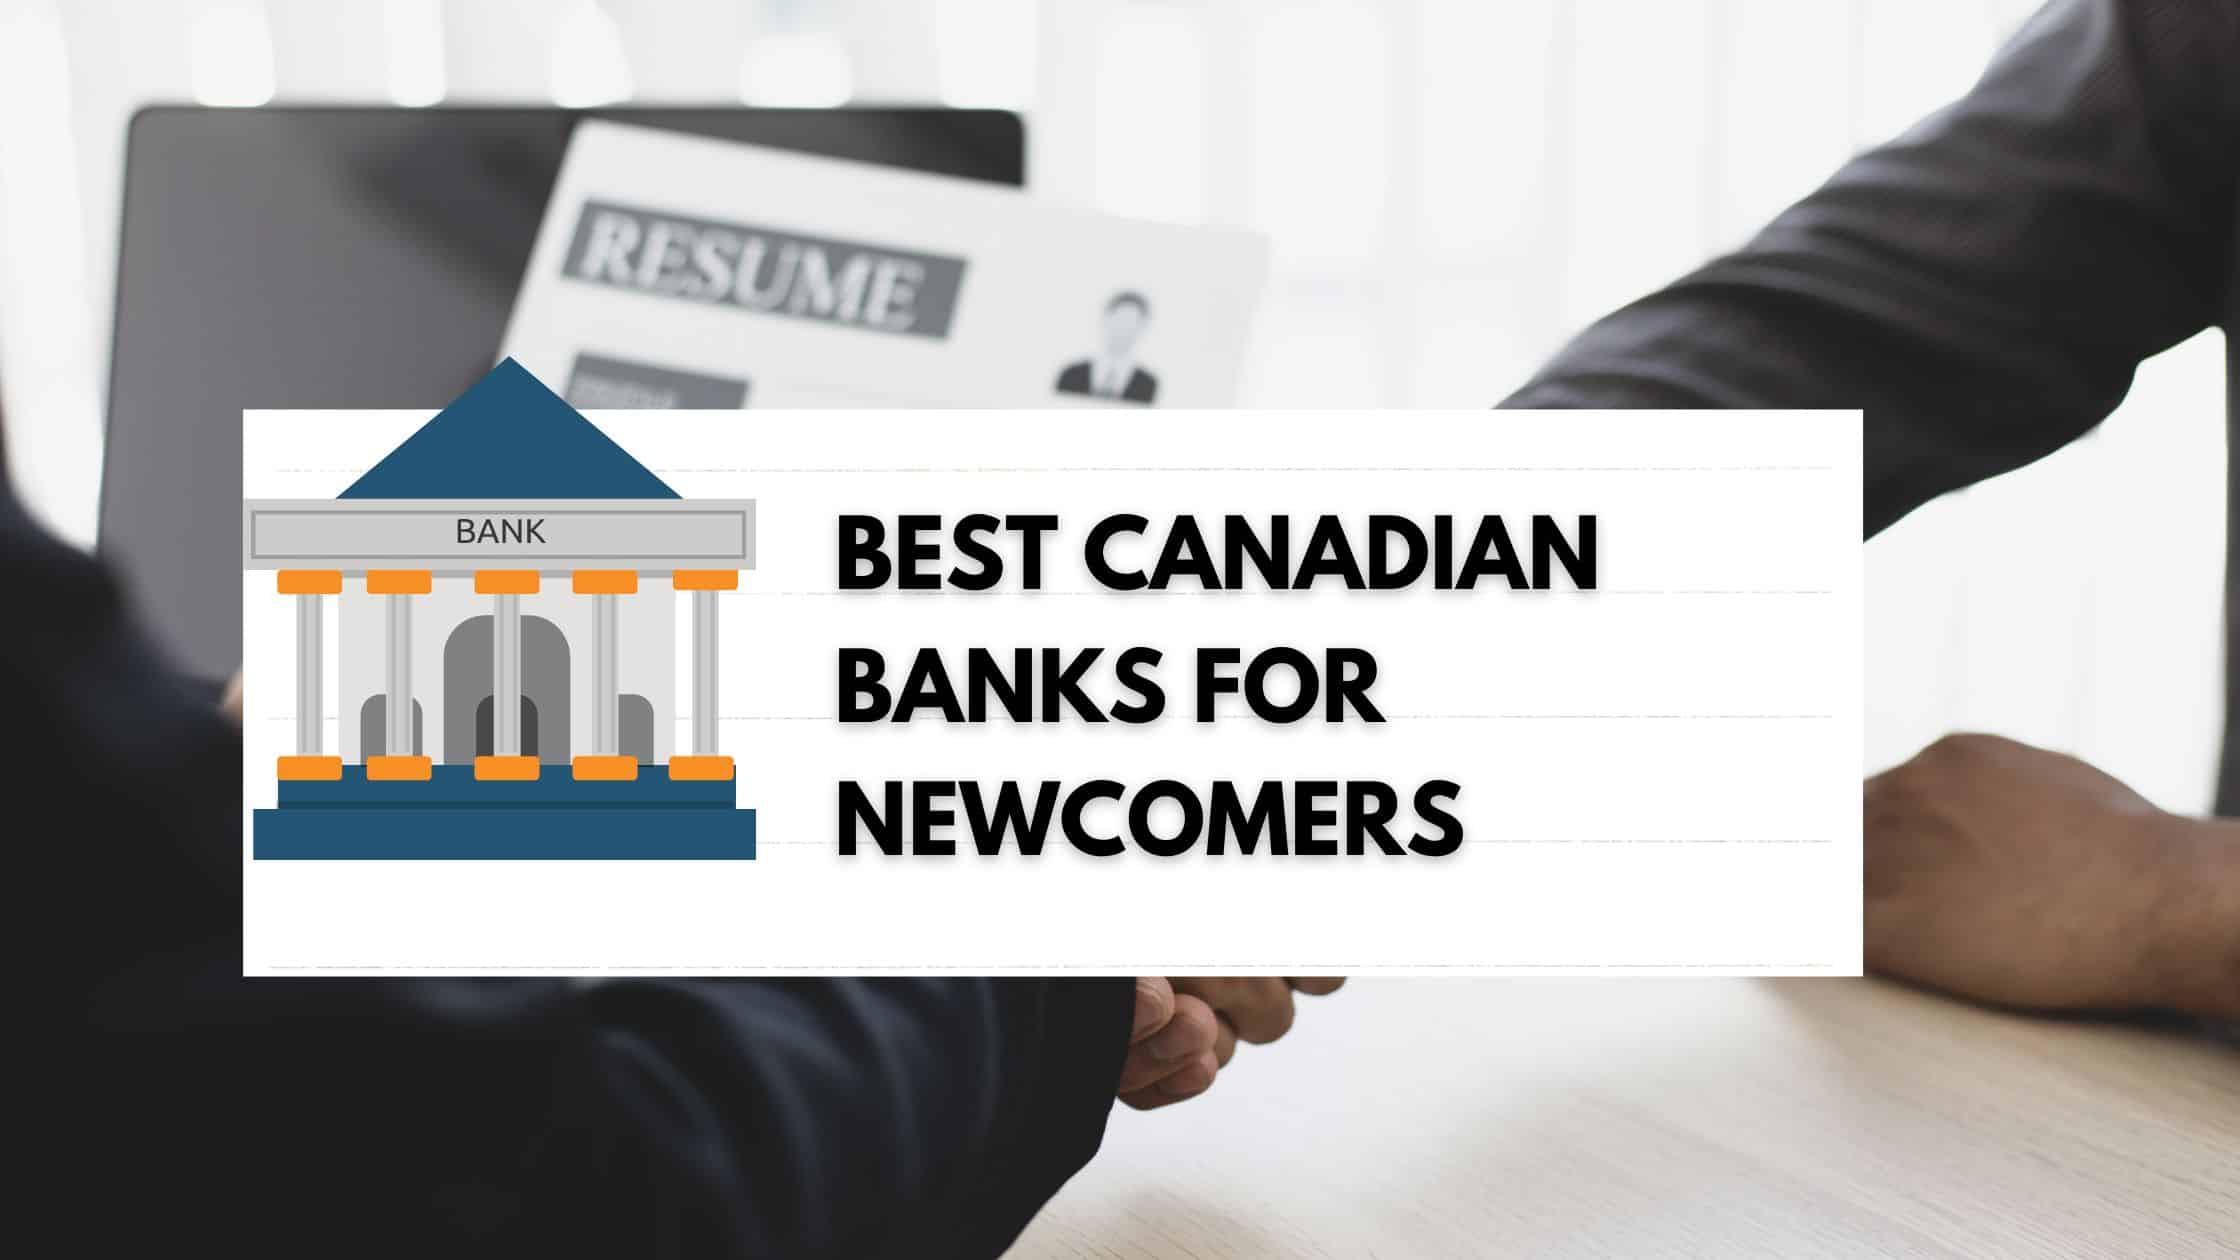 Best Canadian banks for newcomers